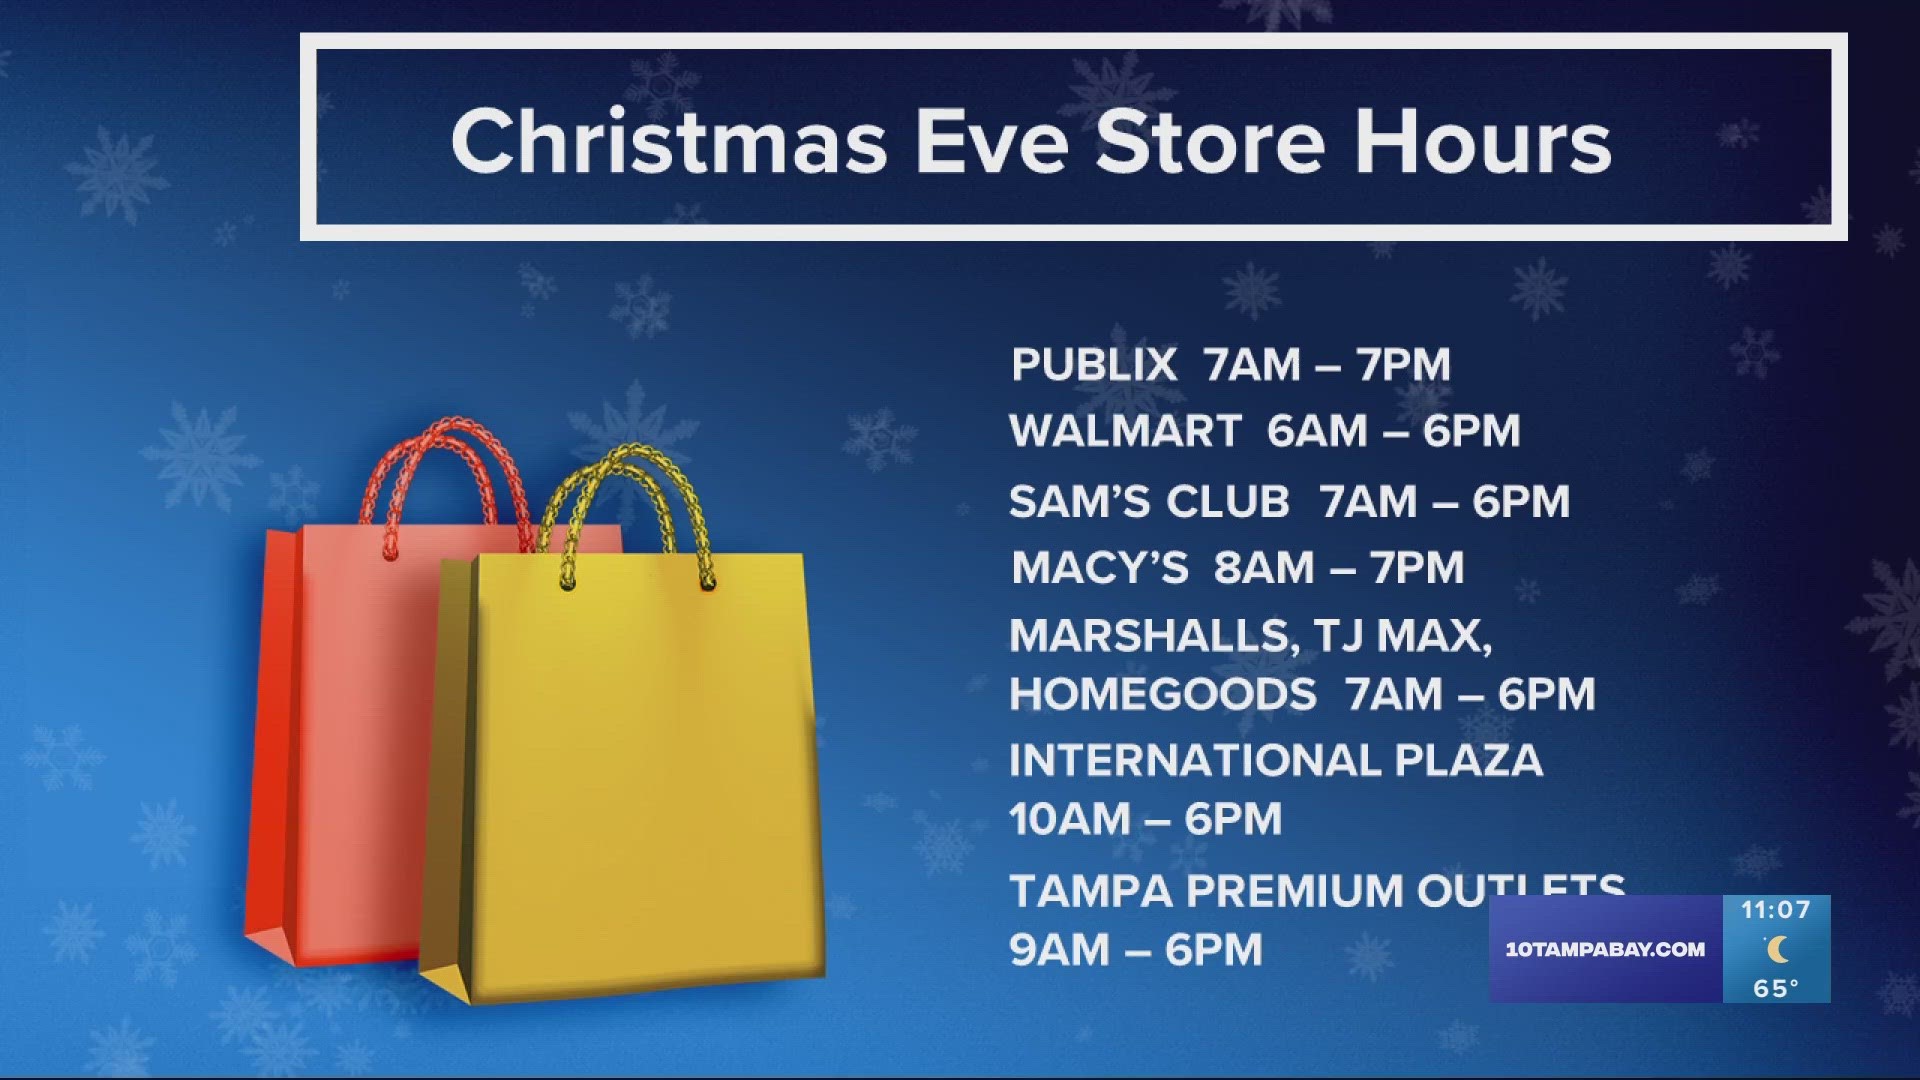 What stores are open and closed on Christmas Eve?